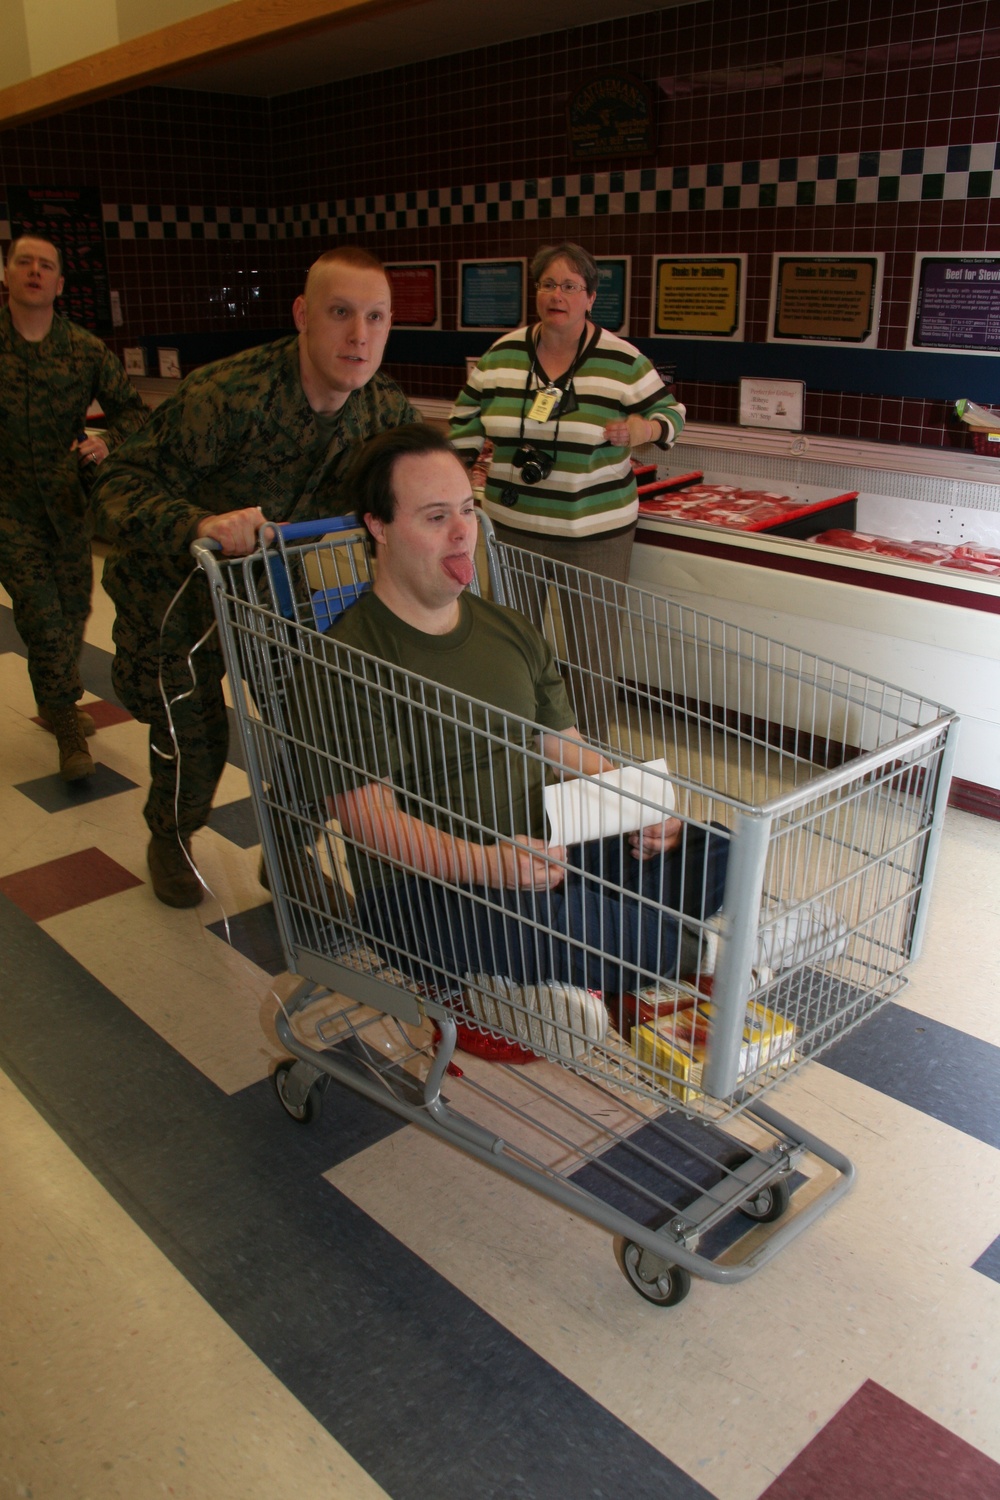 Cherry Point commissary hosts Special Olympians at annual event